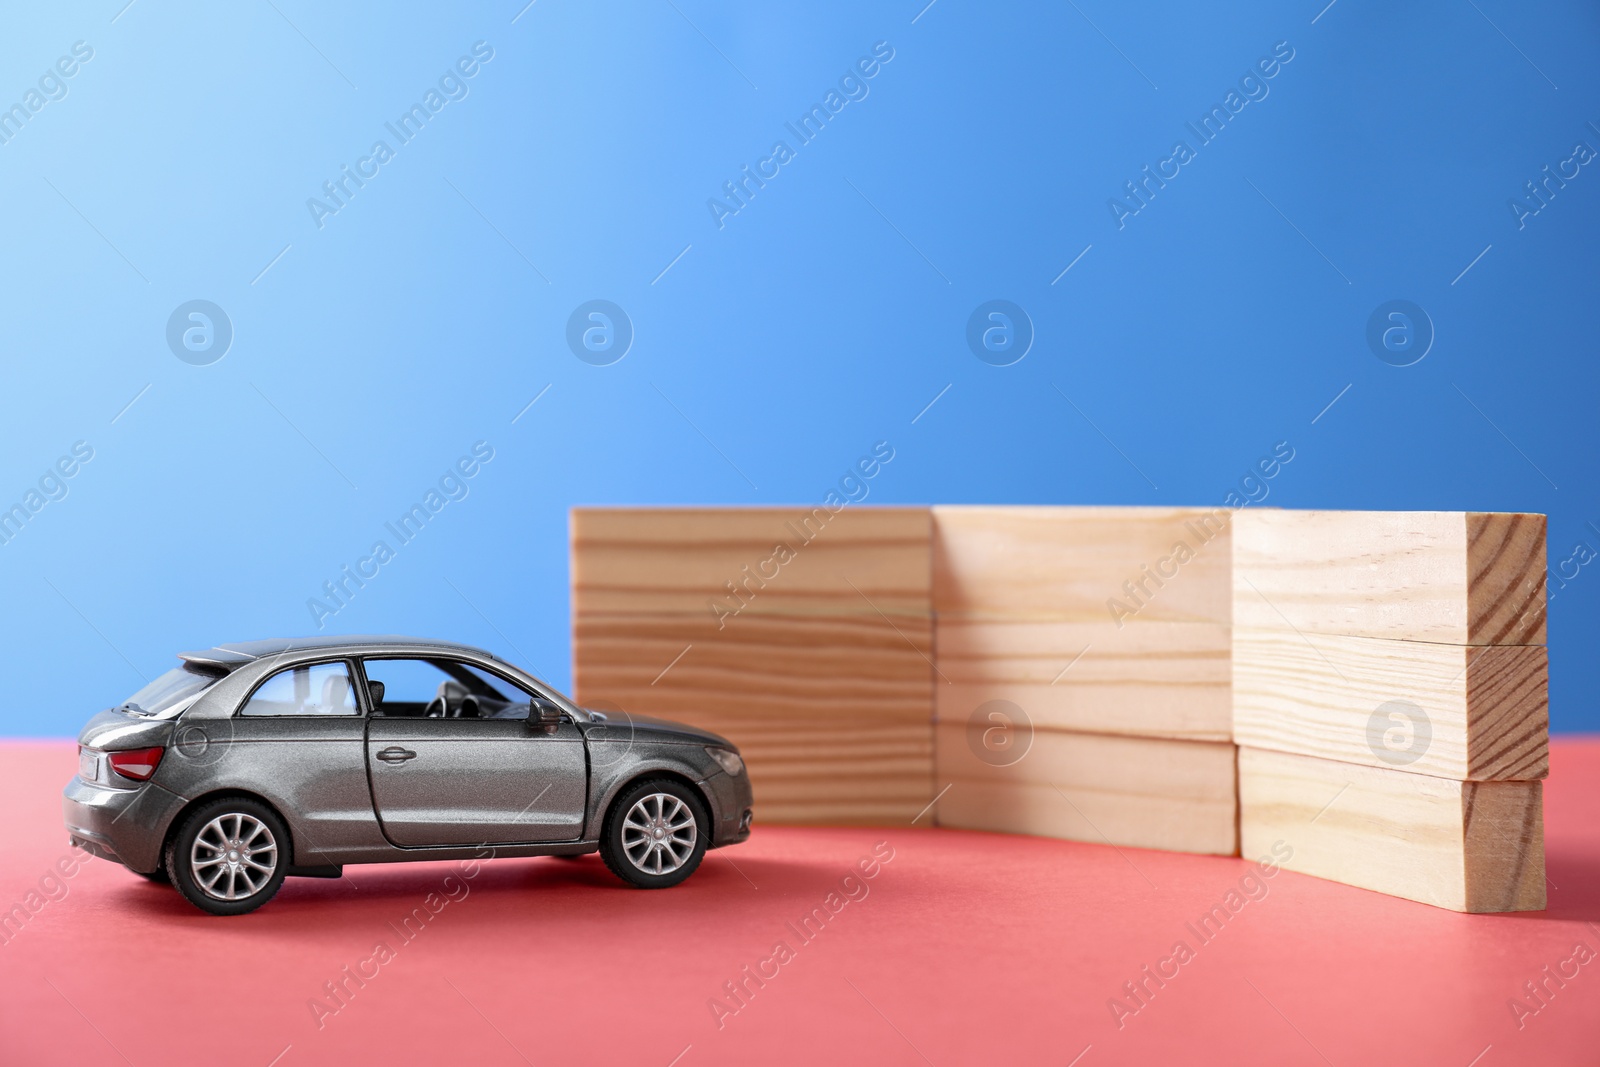 Photo of Development through barriers overcoming. Silver toy car movement blocked by wooden blocks on coral surface, space for text